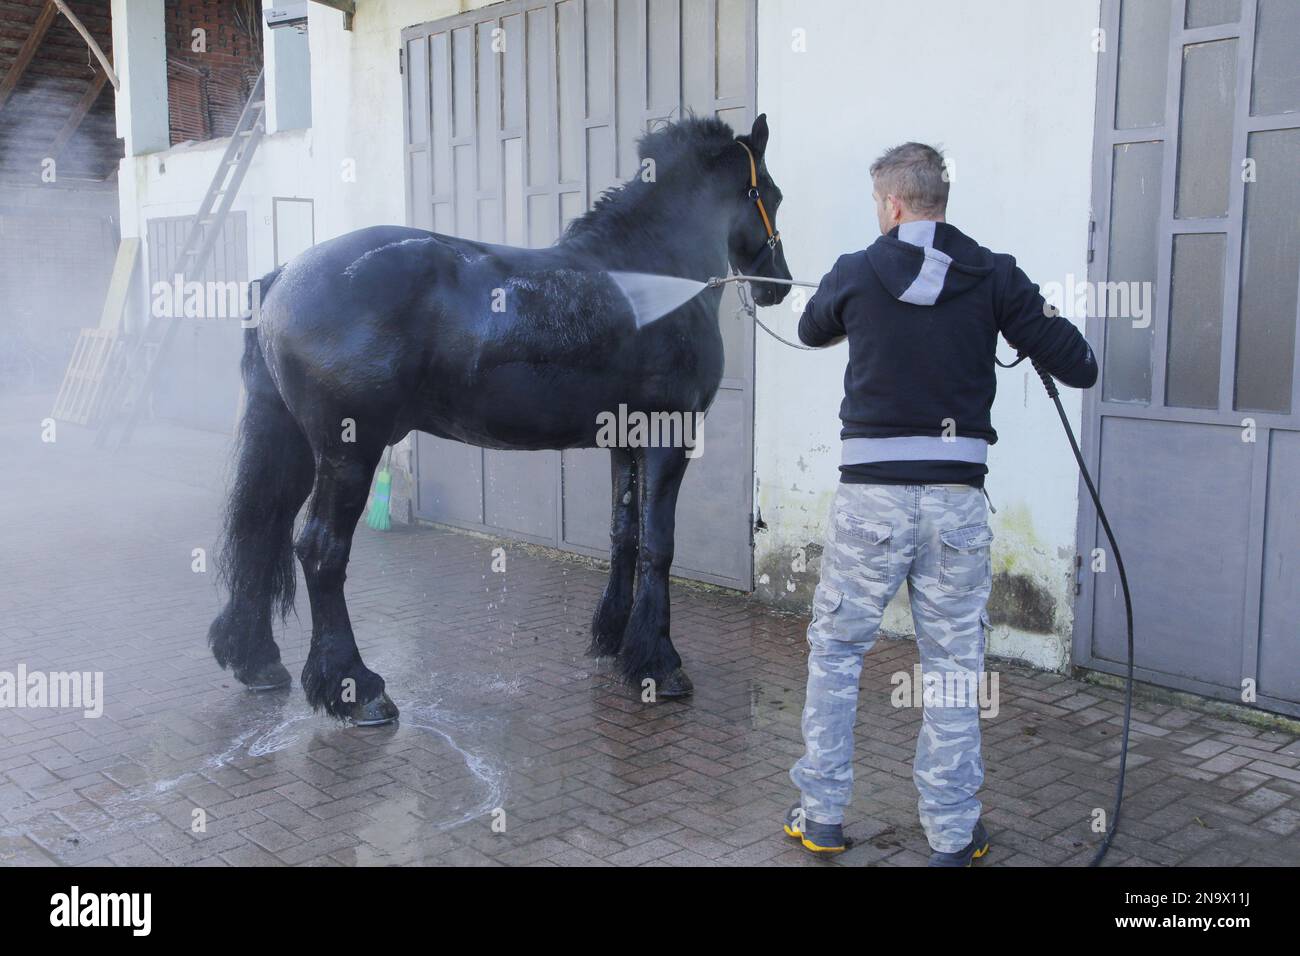 cleaning of a horse Stock Photo